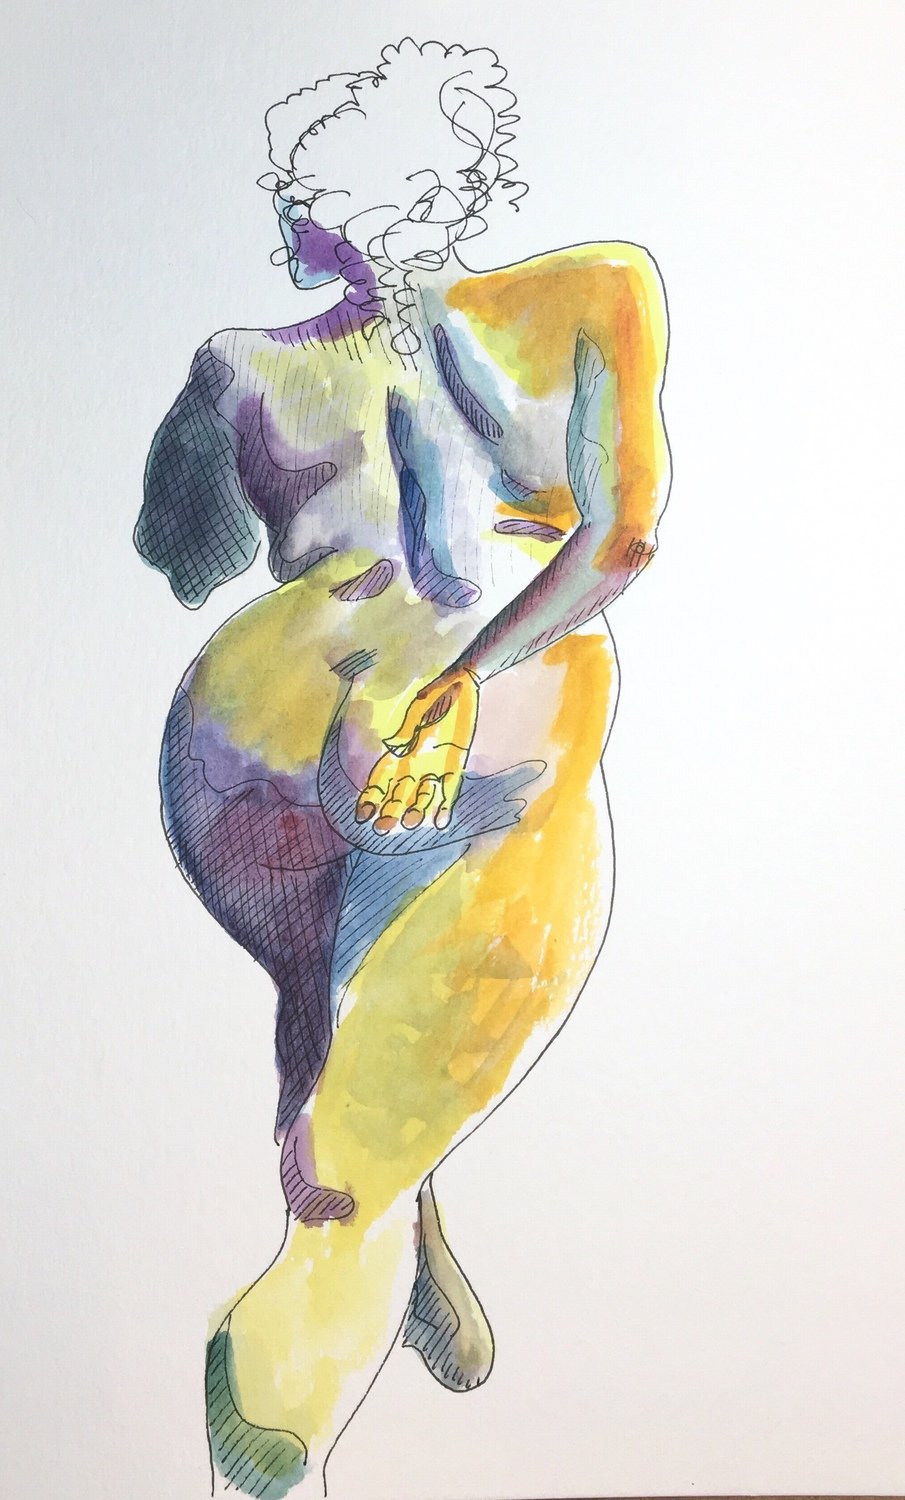 Untitled Figure Drawing from July 25, 2018 at Birdsong Brewing